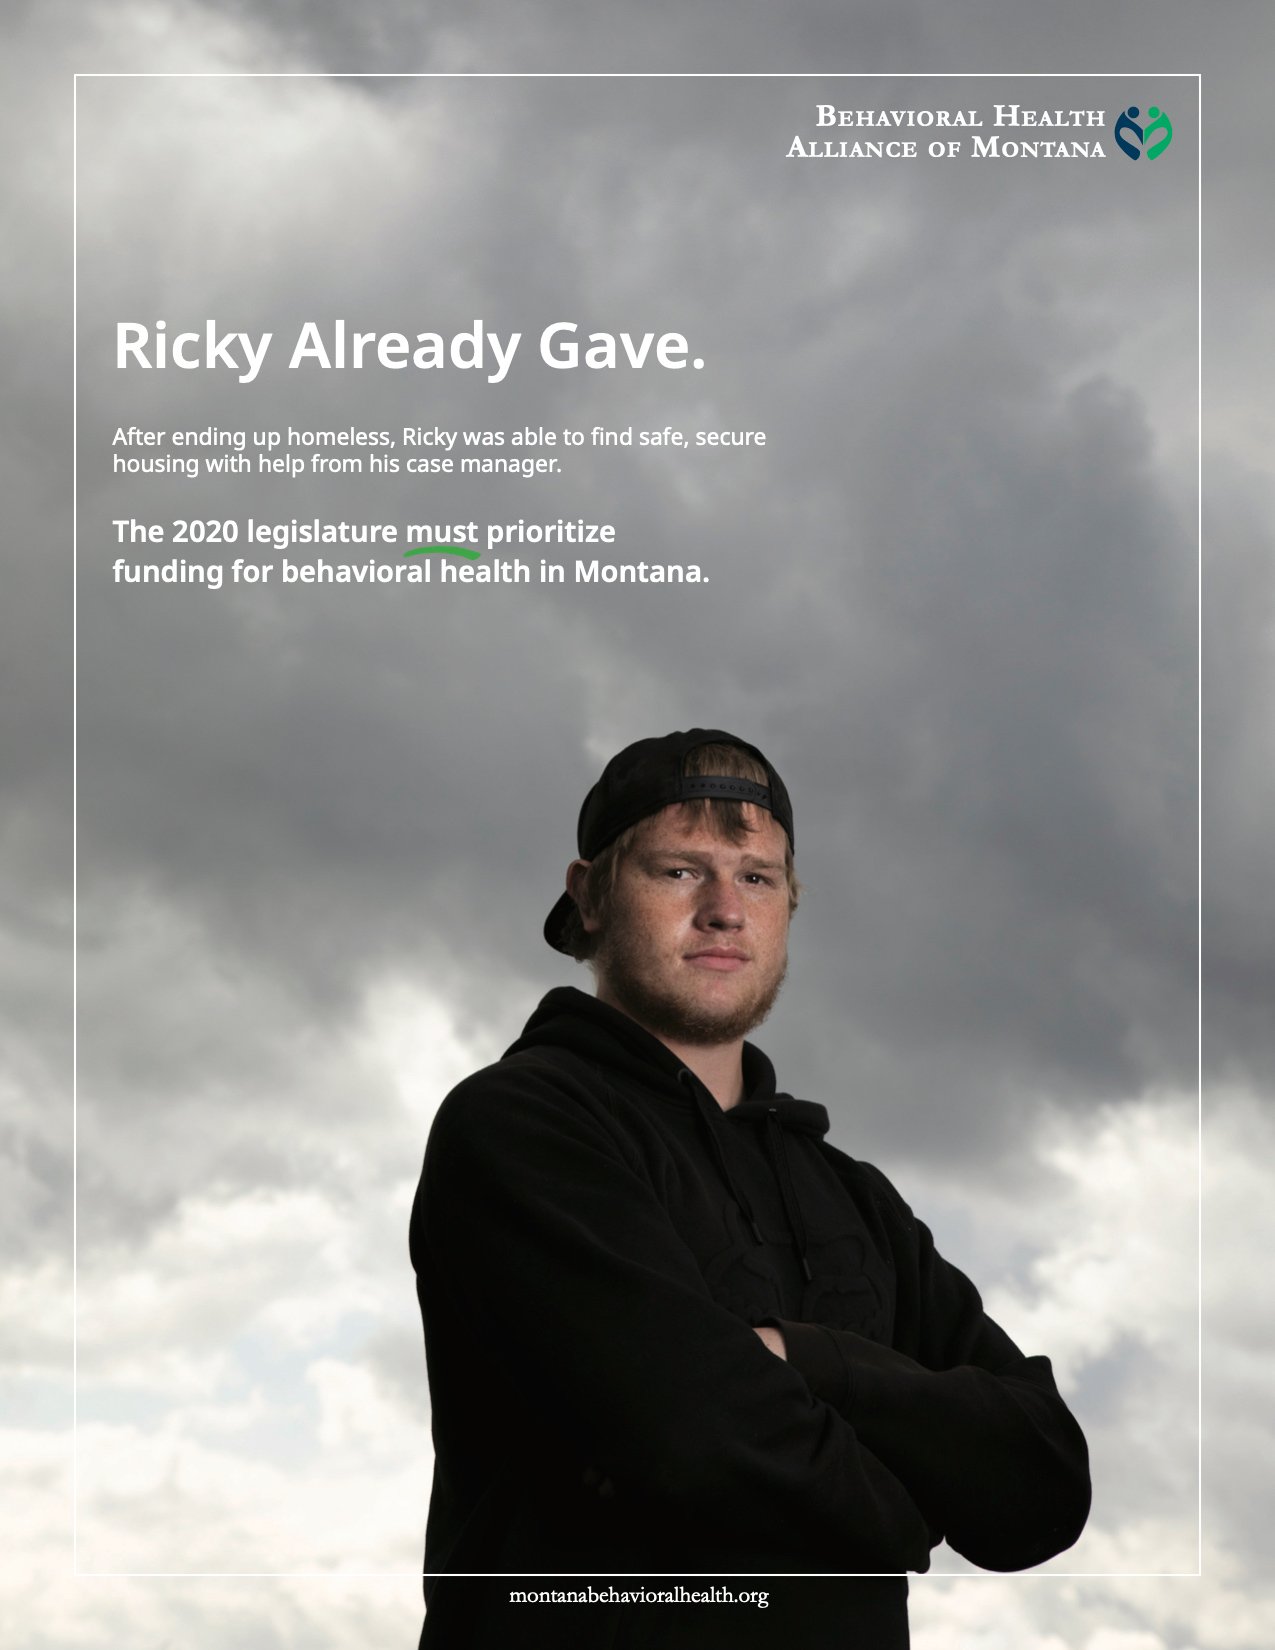 Andy Kemmis shot of Ricky for Behavorial Health Alliance of Montana